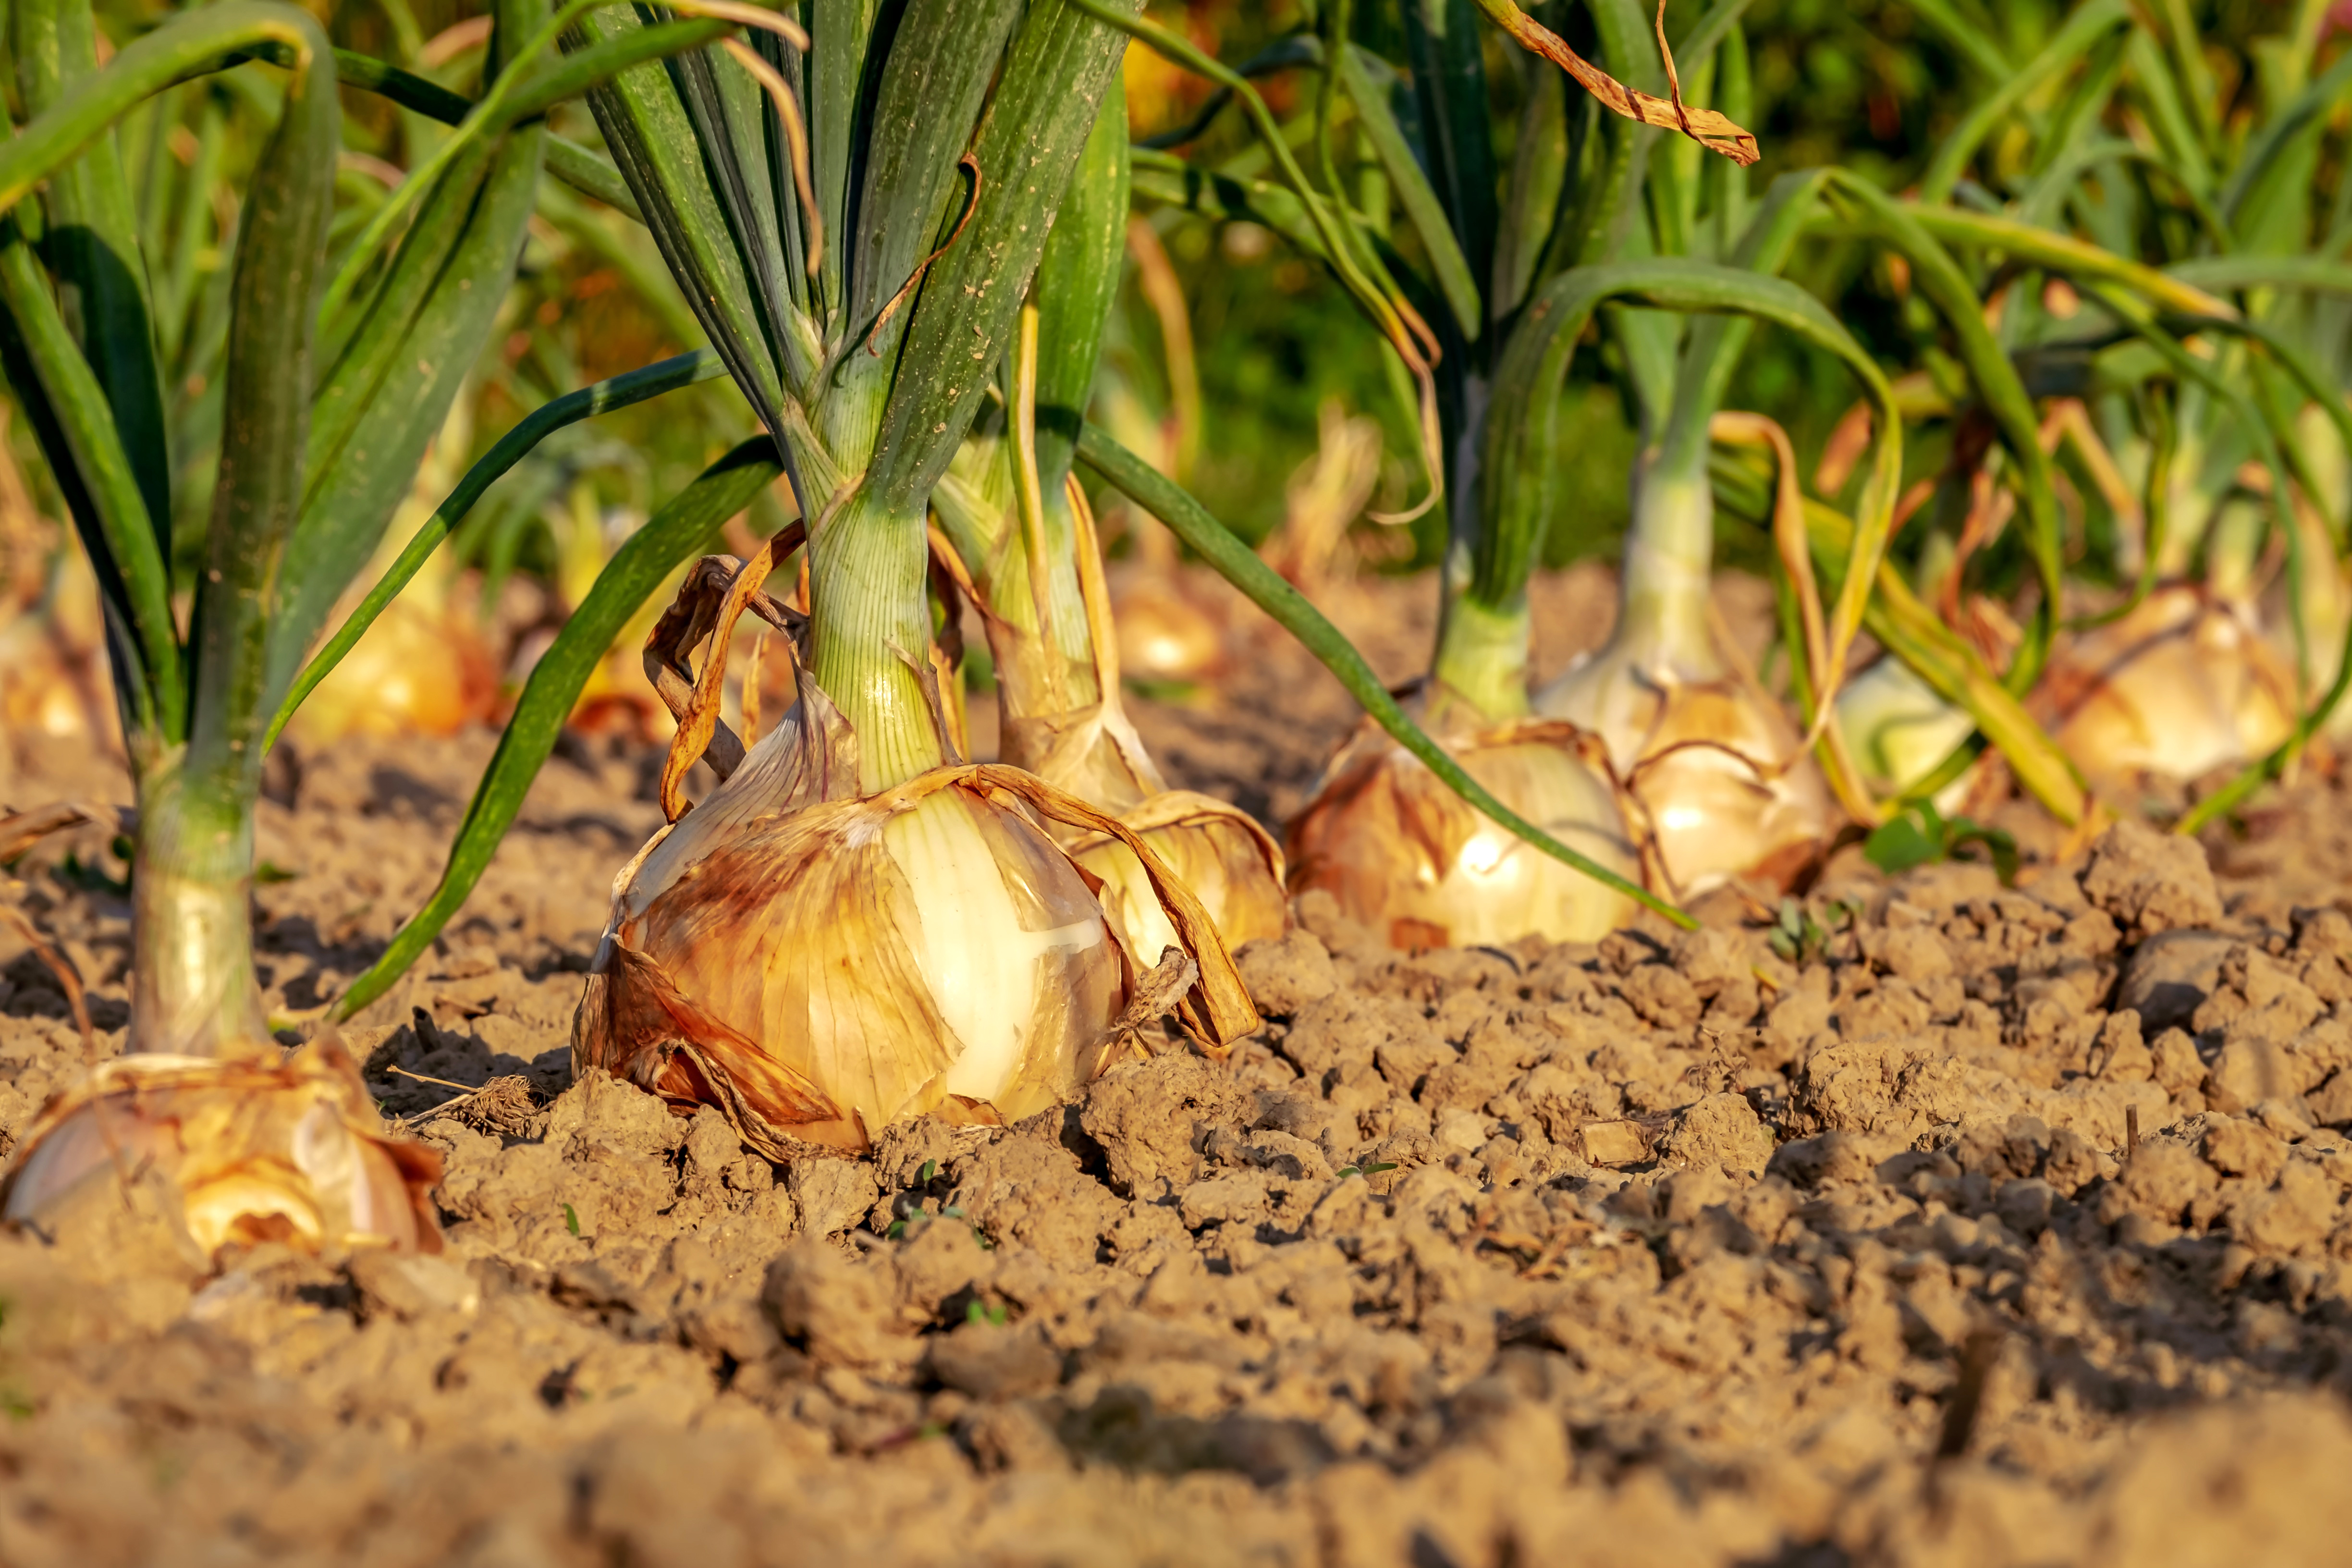 Now is the time to start making plans if you want to grow giant onions. (Photo courtesy of Pixabay)